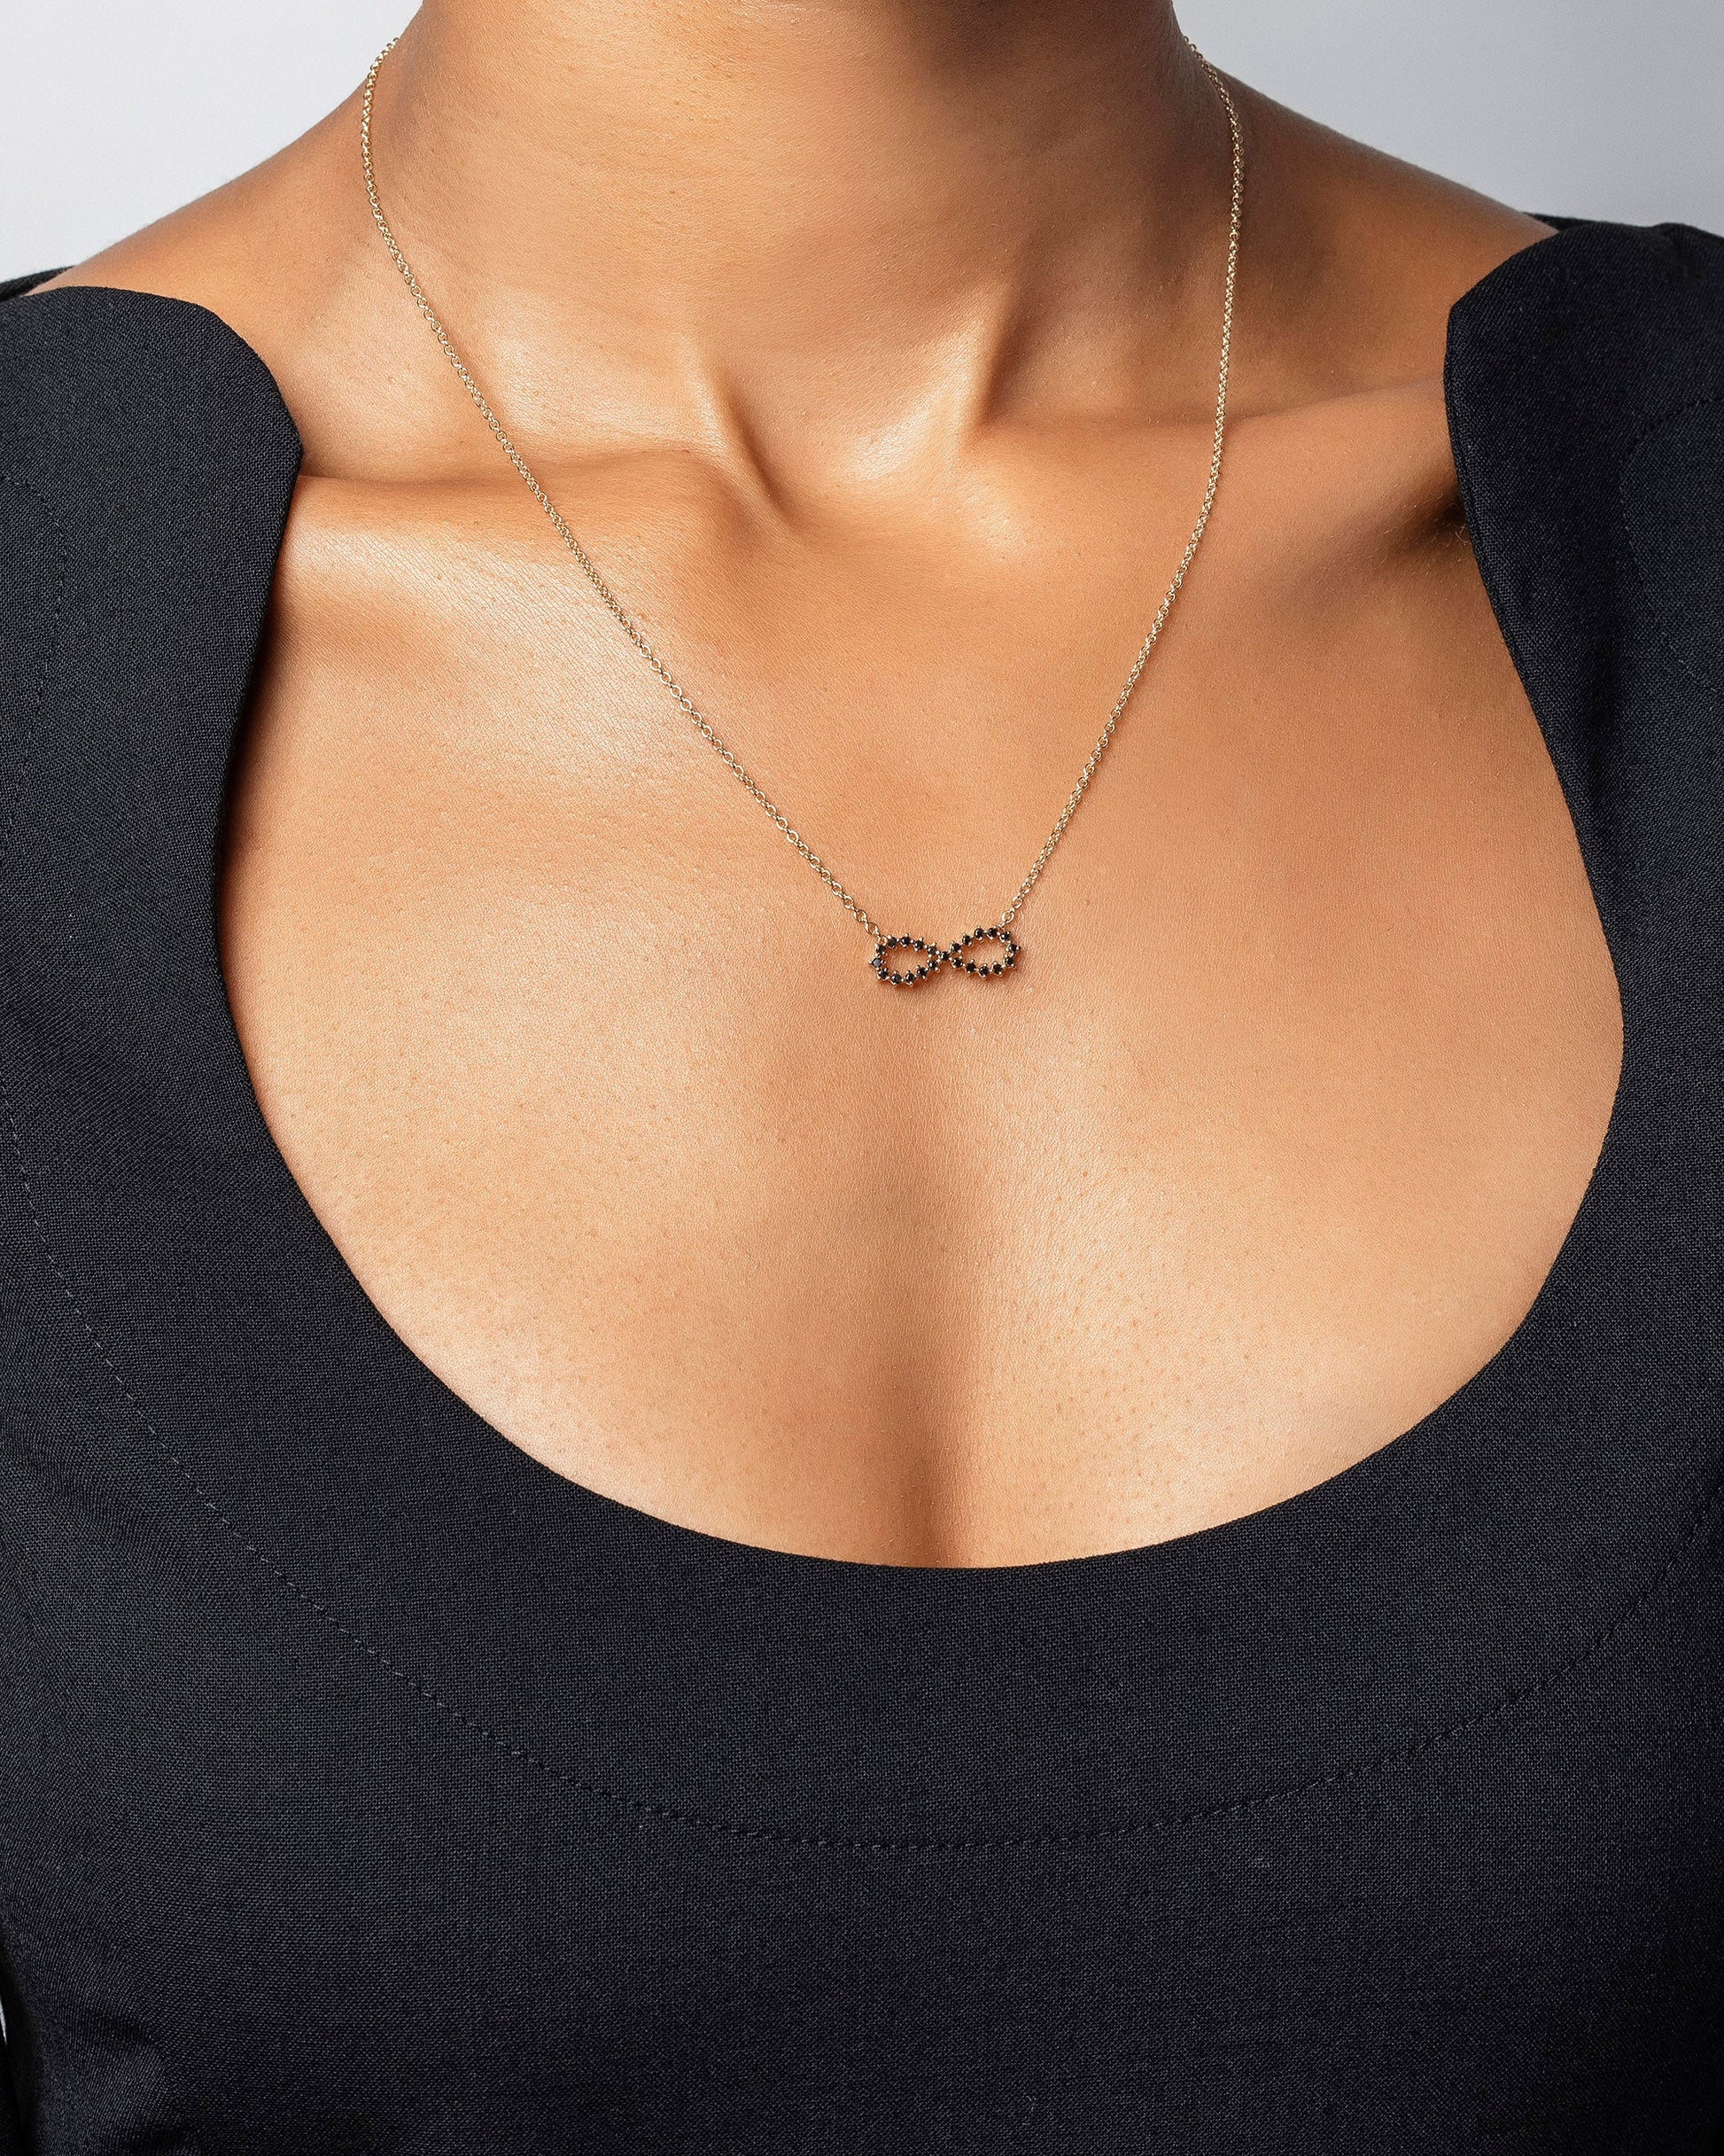 Infinity Necklace on model.